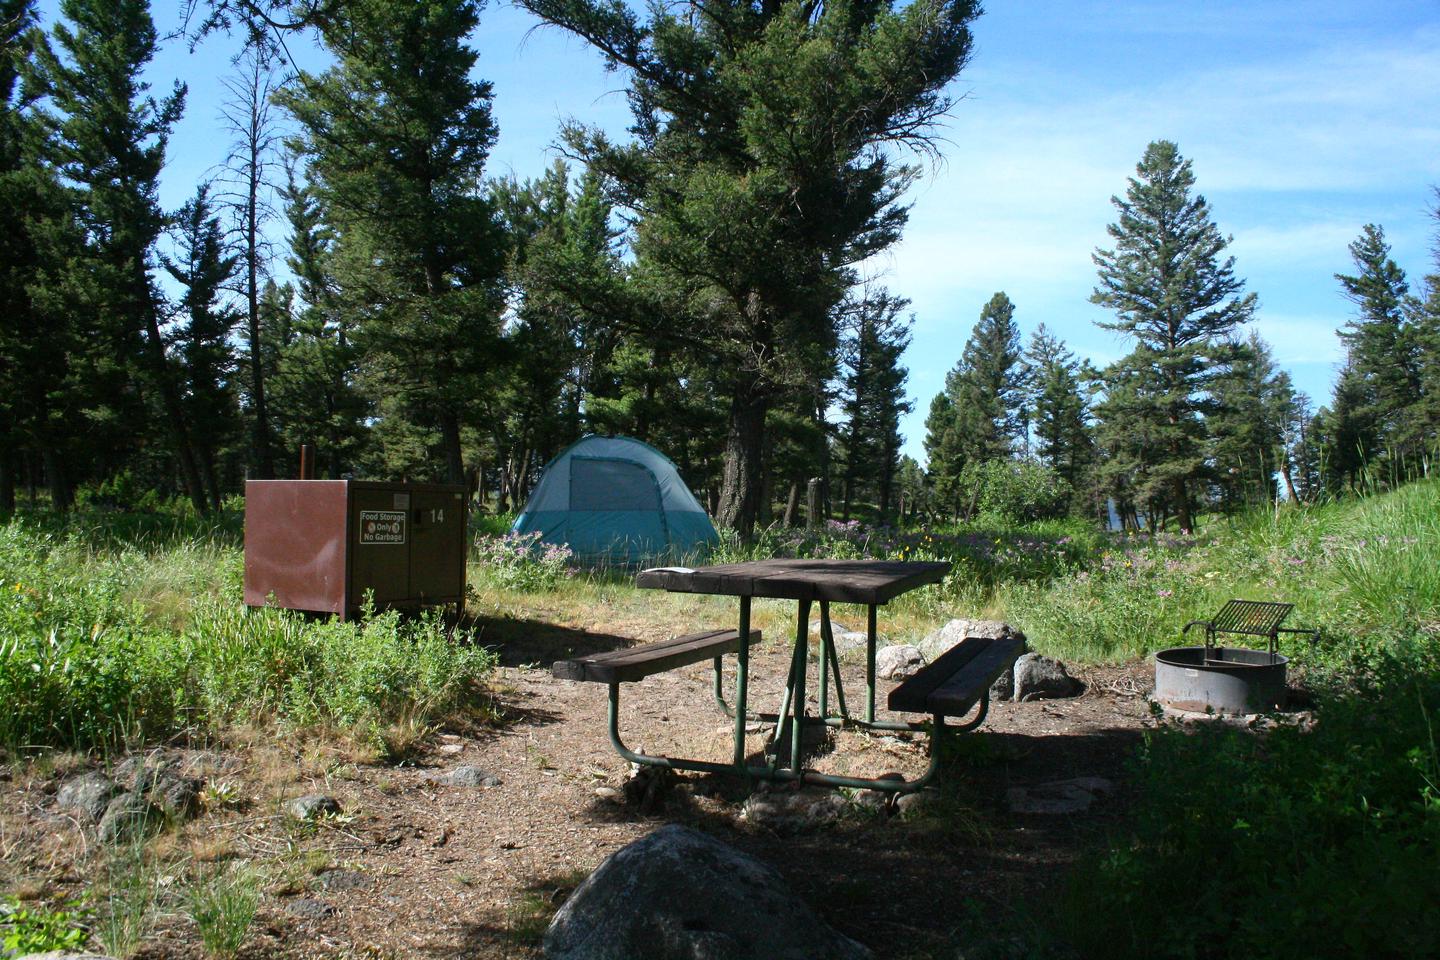 Slough Creek Campground Site #14.Slough Creek Campground Site #14